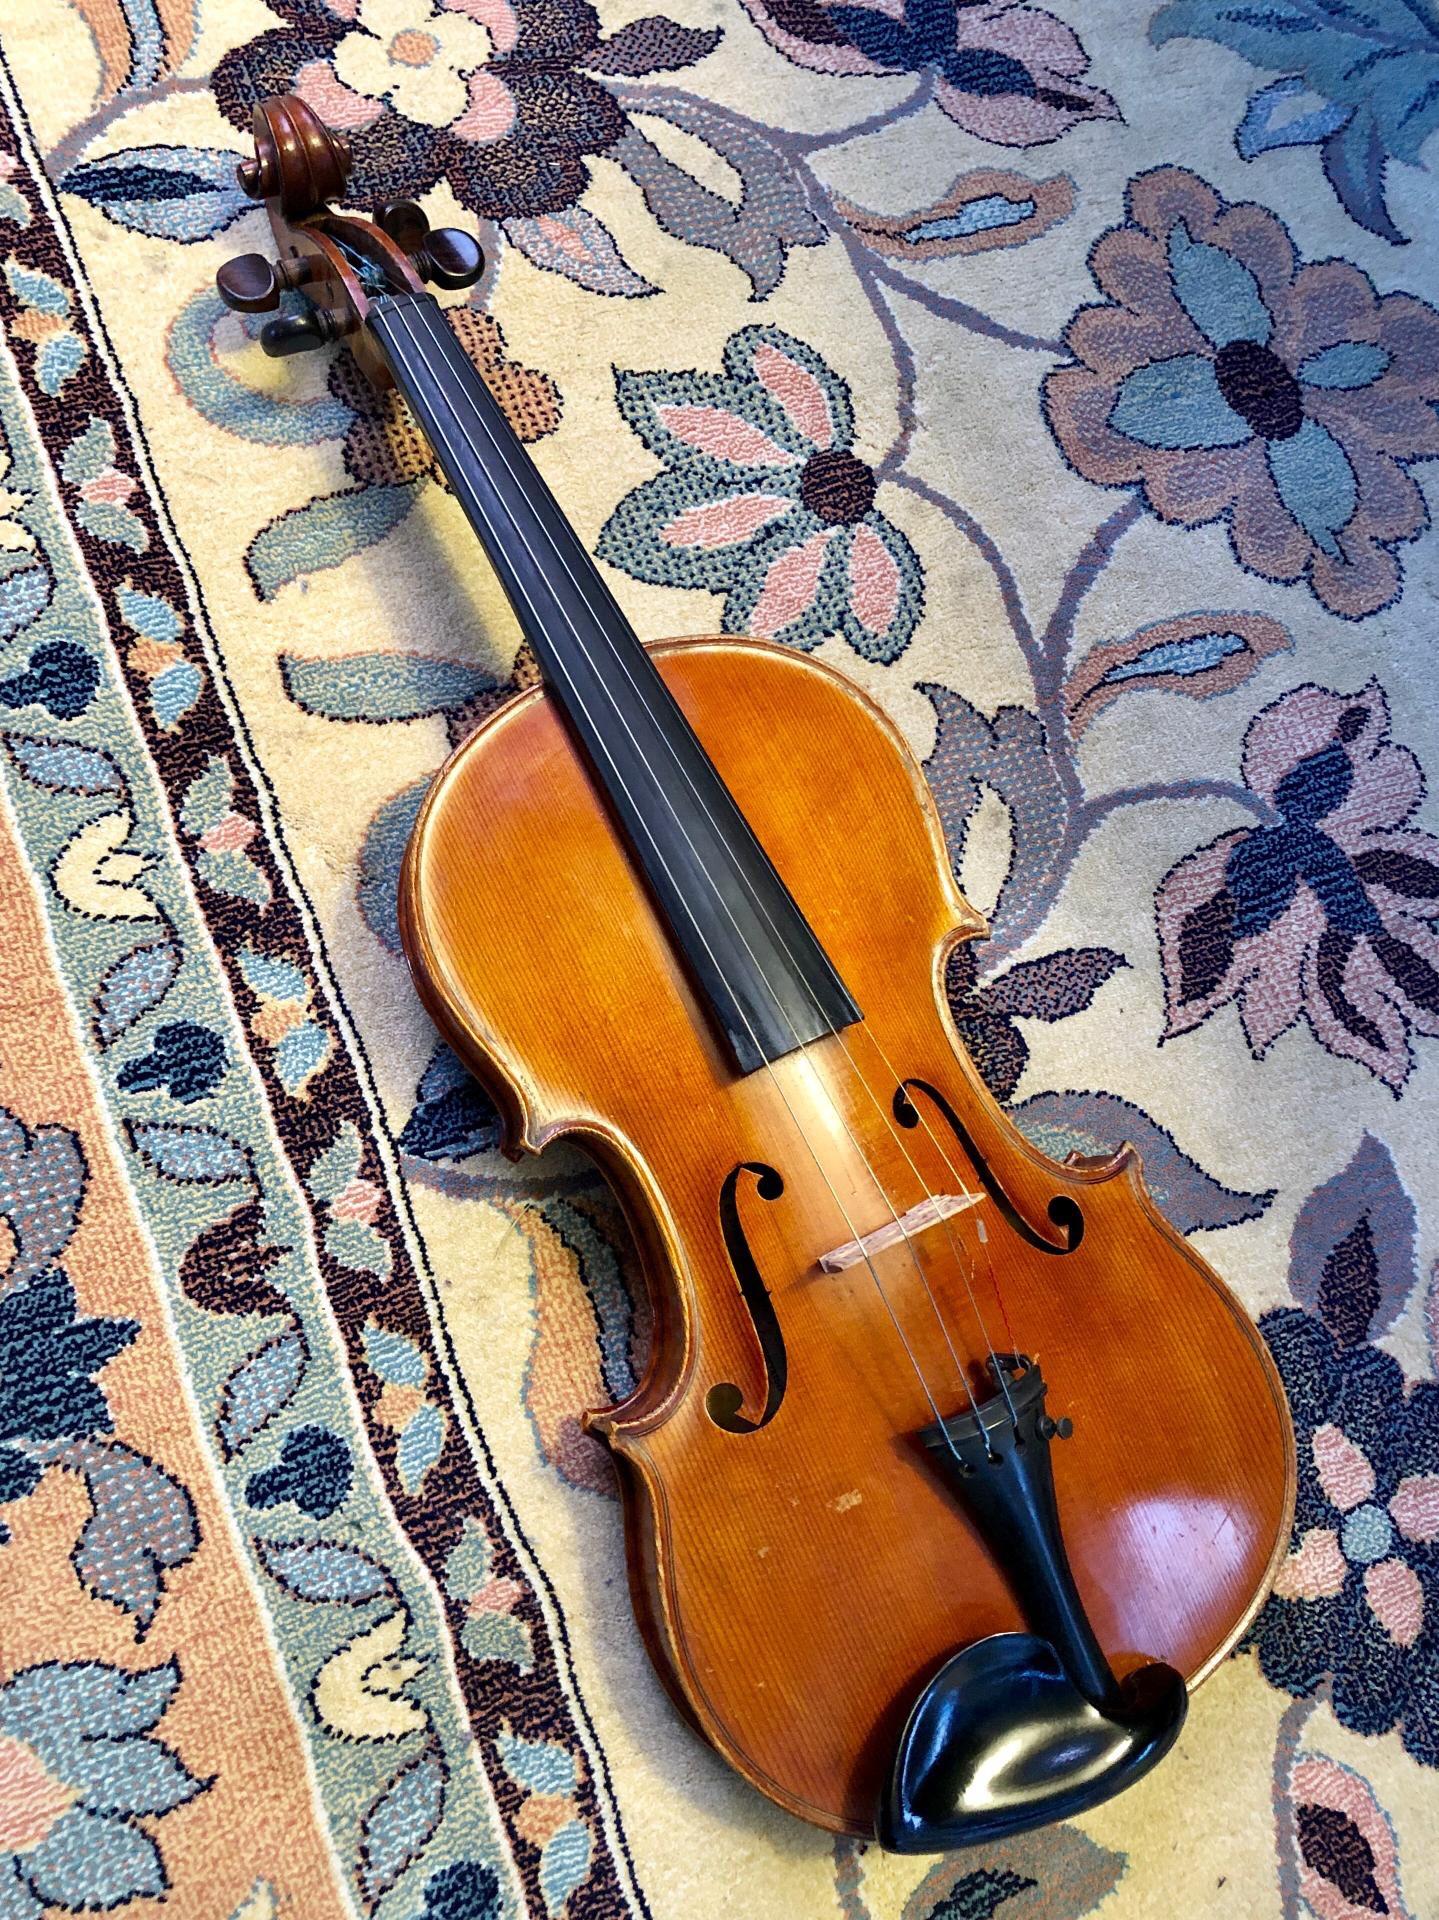 The firm Gand & Bernardel was founded in 1866 by three makers from two important houses of time. Charles Nicolas Eugene Gand and the Bernardel brothers, Gustave and Ernest came together, loyal to the same school of violin making. The three learned